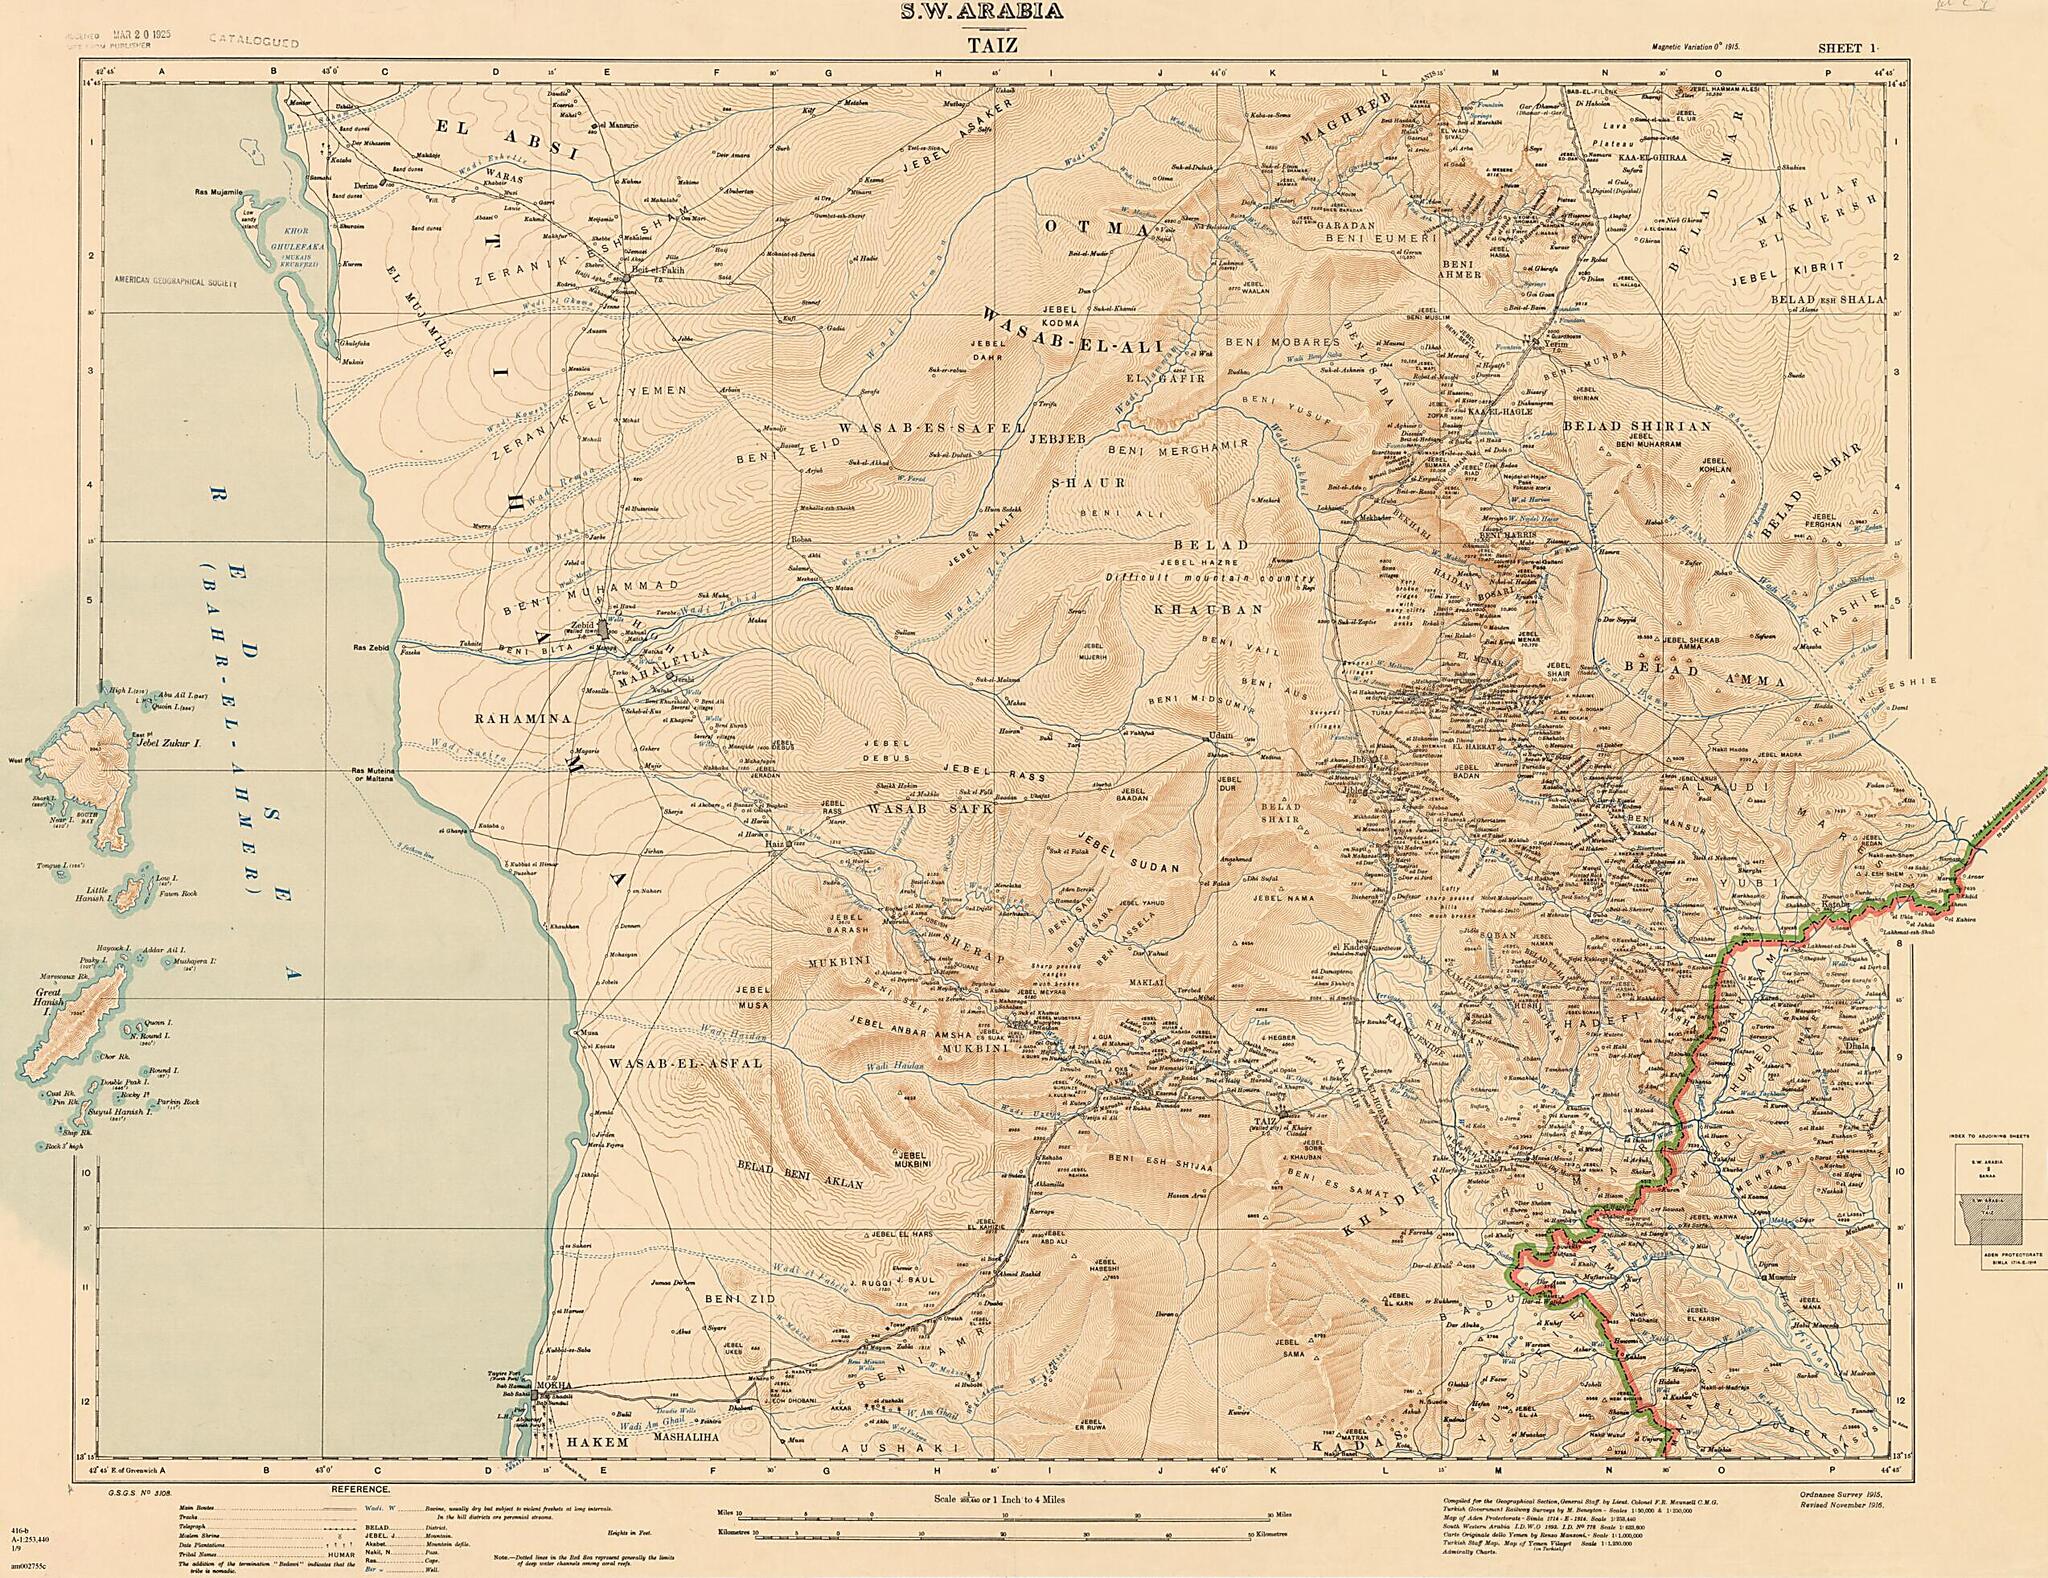 This old map of Southwest Arabia: Taiz, Sheet 1. (S.W. Arabia: Taiz, Sheet 1) from 1916 was created by  Great Britain. War Office. General Staff. Geographical Section, Francis Richard Maunsell in 1916